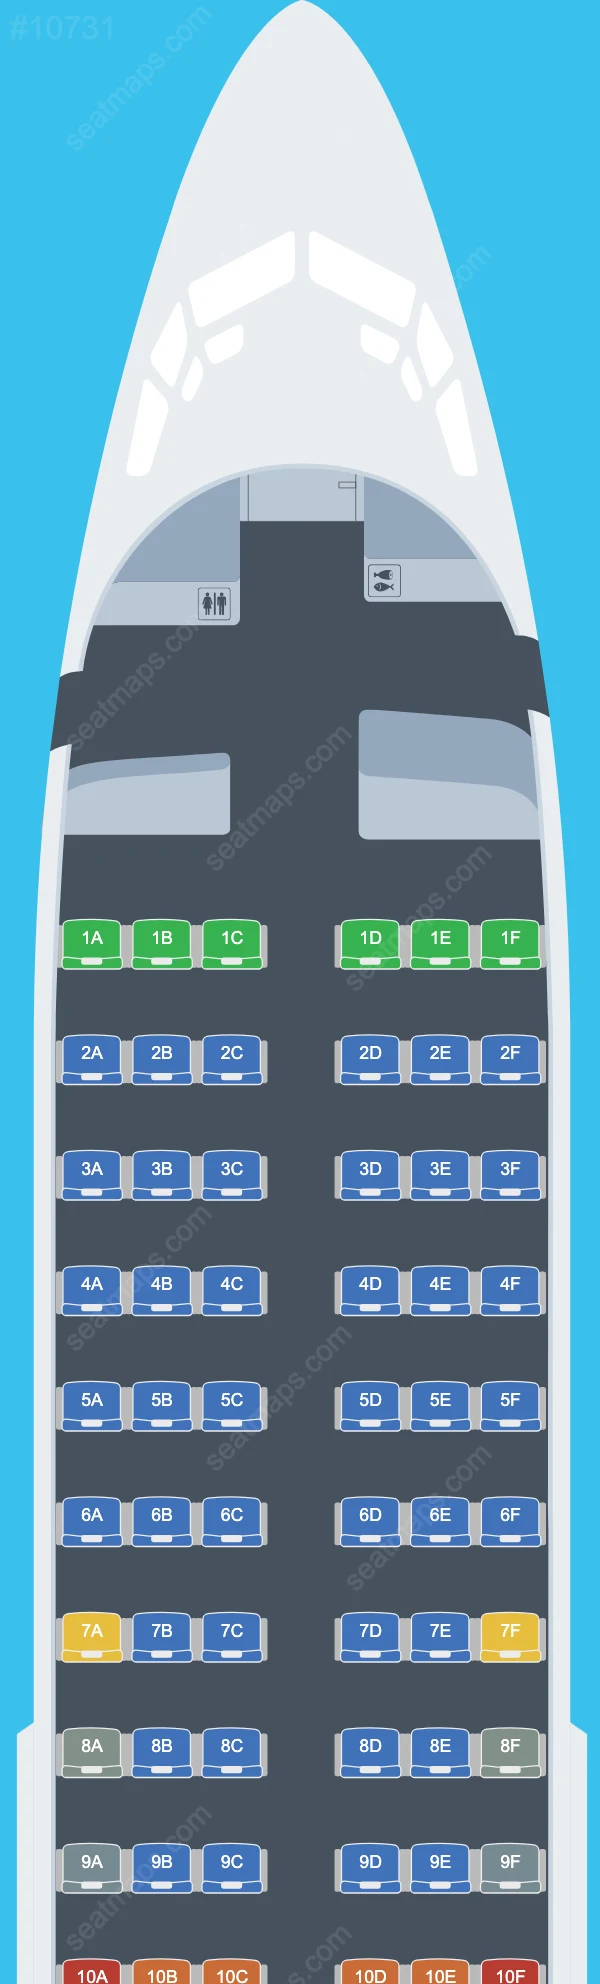 Canadian North Boeing 737-700 seatmap mobile preview